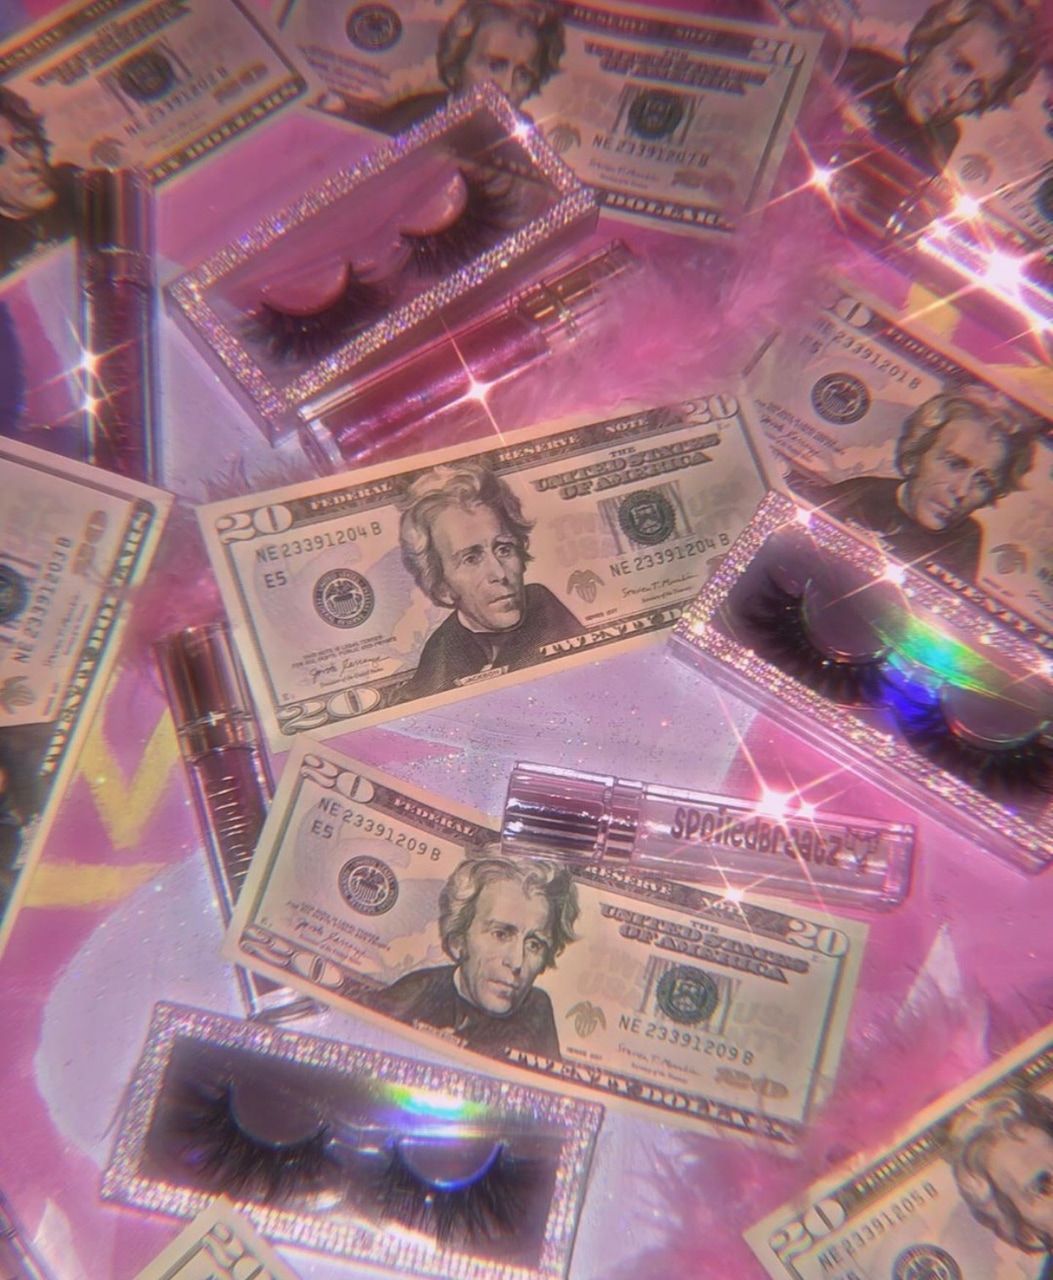 A pile of money and makeup on the table - Money